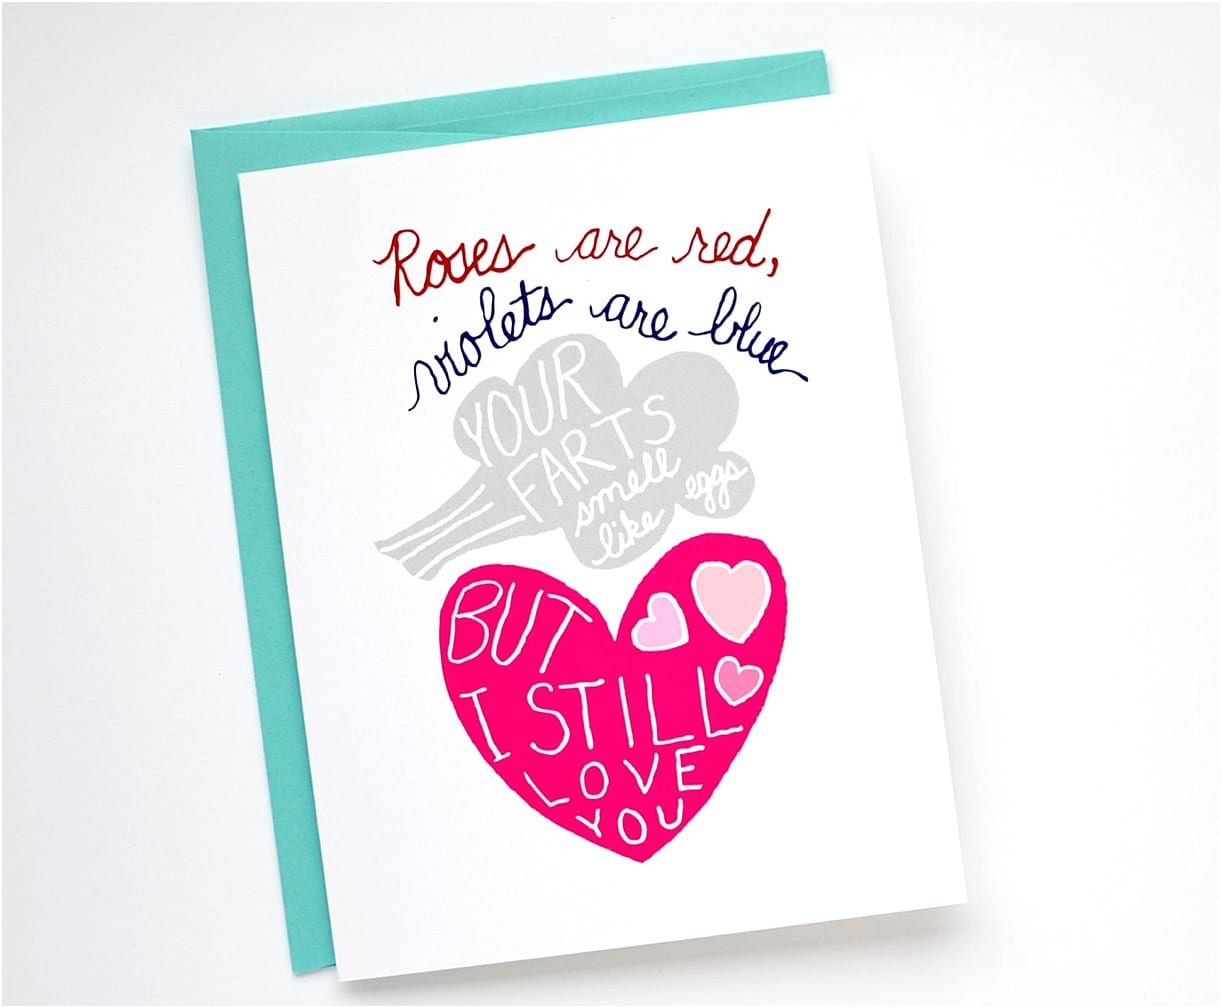 Funny Clean Valentine's Day Cards | Hill City Bride Virginia Wedding Blog